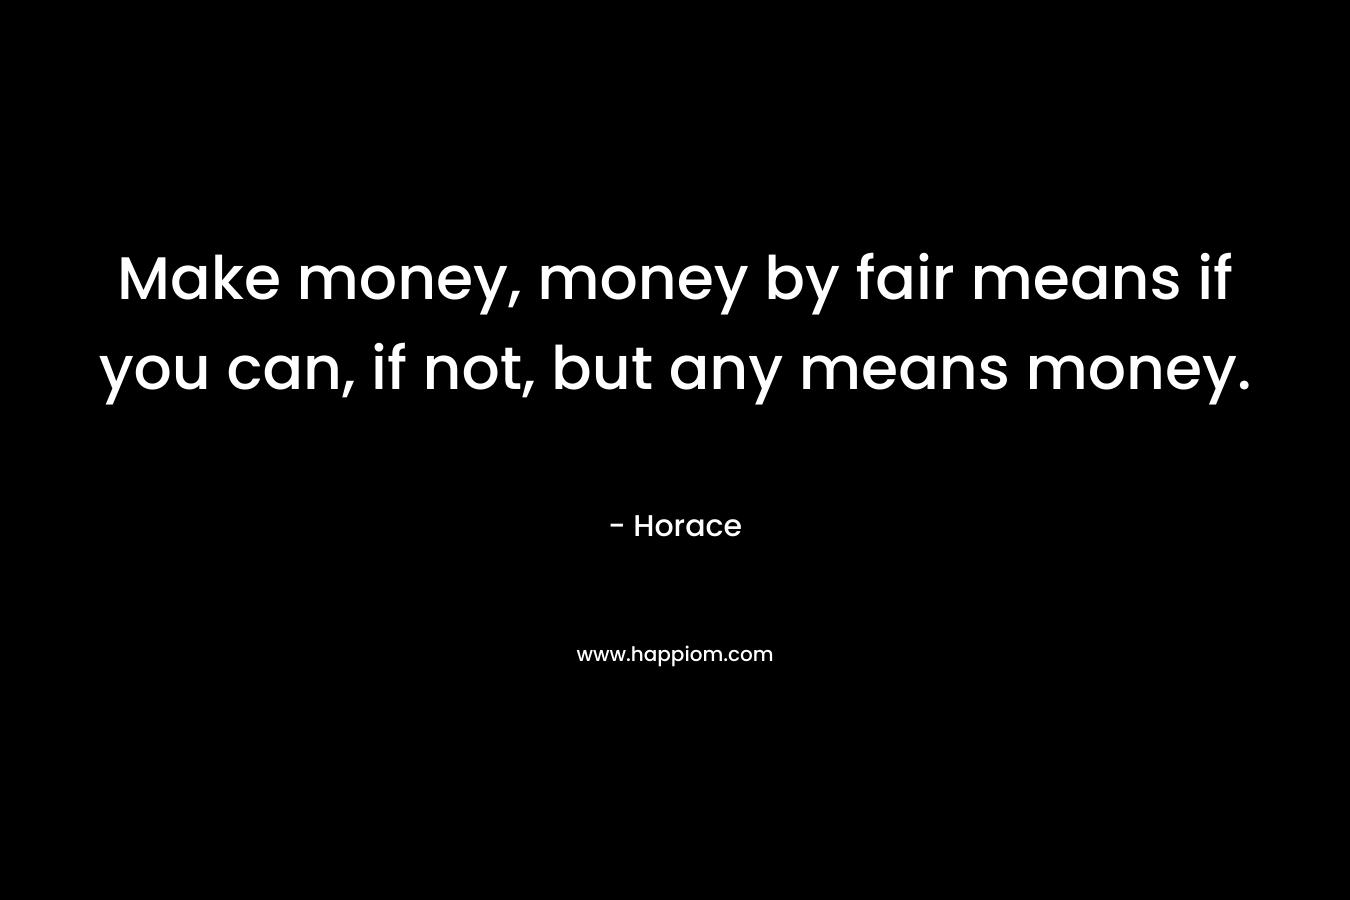 Make money, money by fair means if you can, if not, but any means money. 